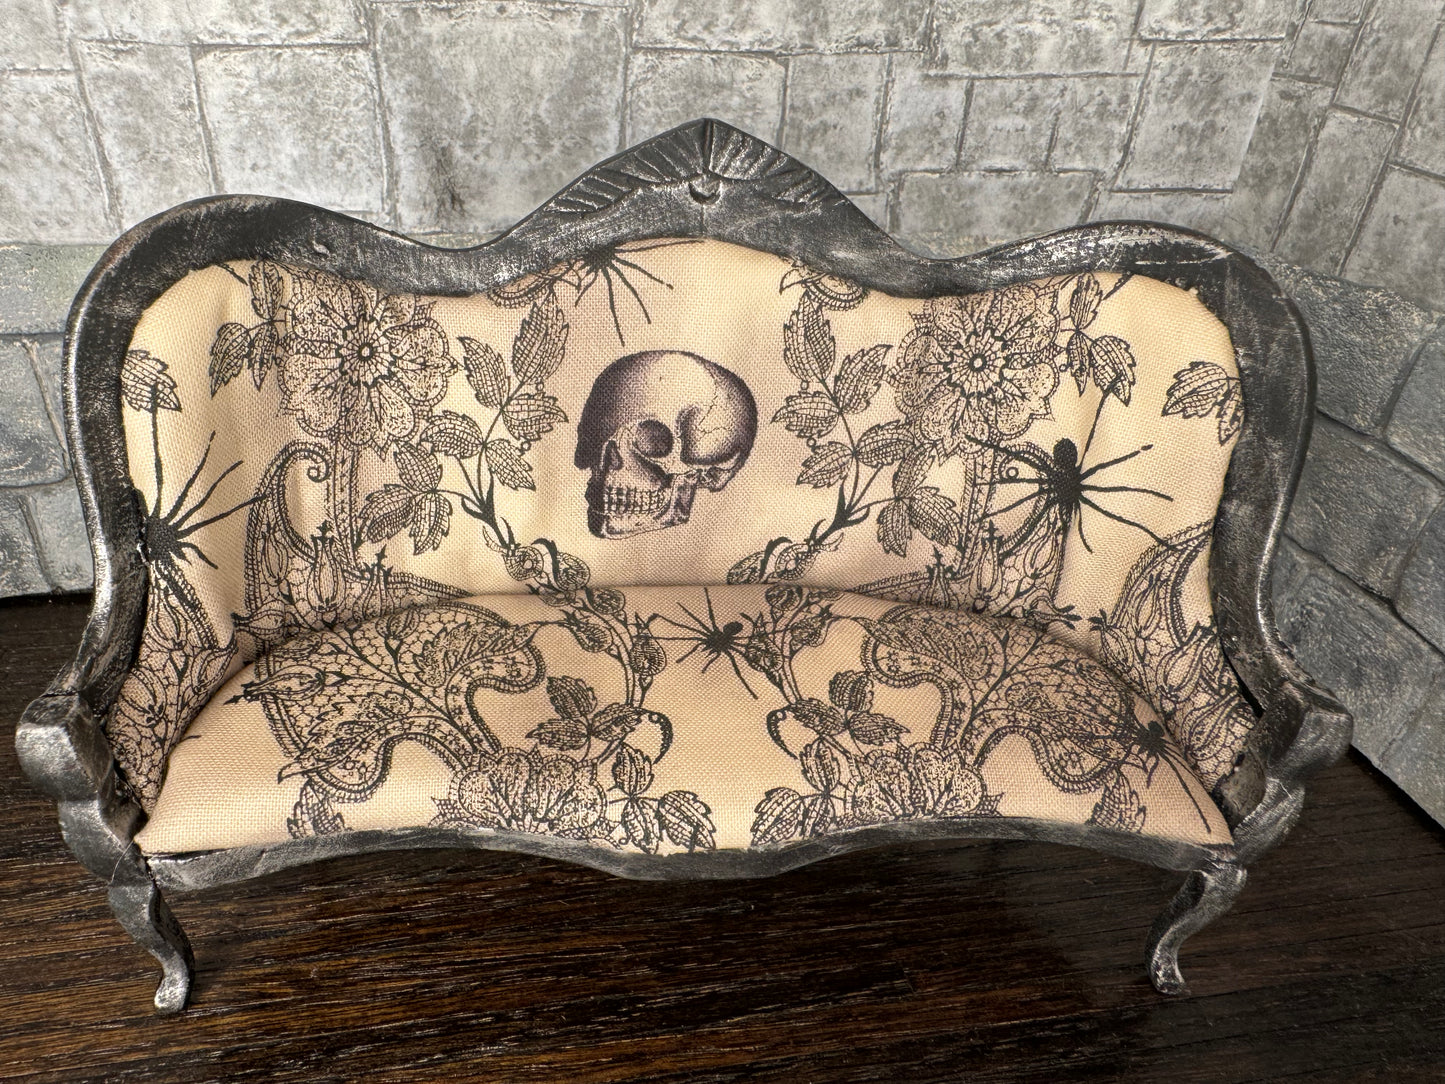 Gothic Spooky Skull and Spider Couch - Dollhouse Miniature 1:12 Scale